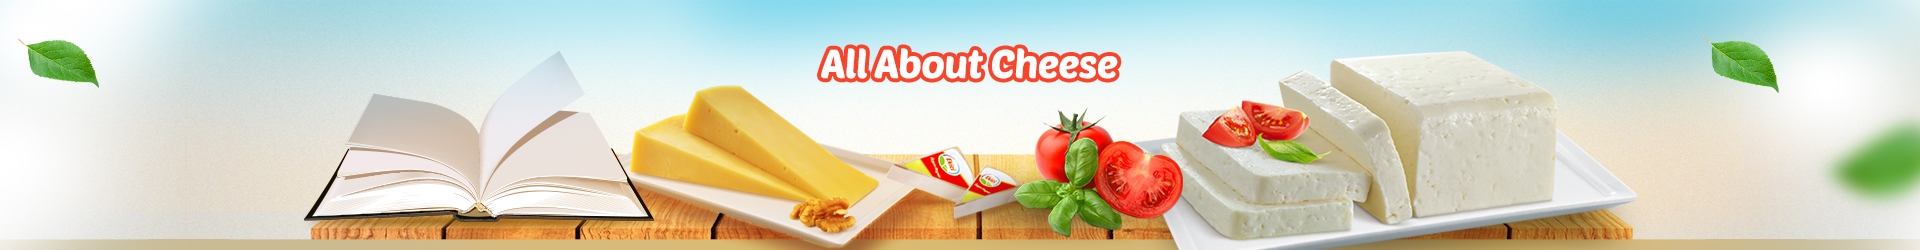 All About Cheese